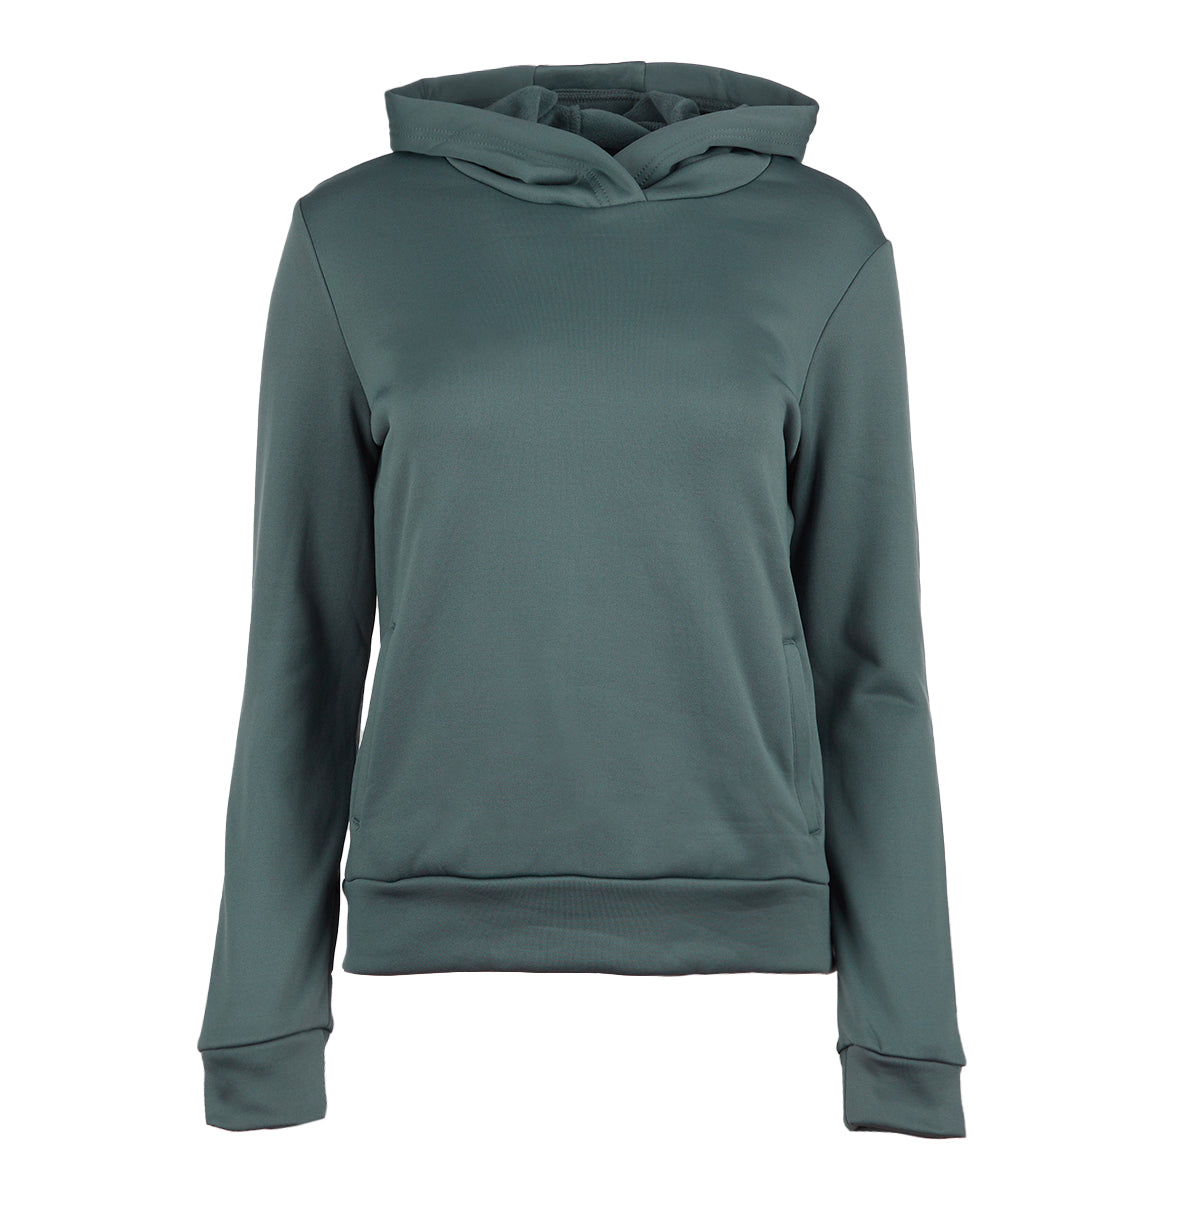 90 Degree By Reflex - Women's Brushed Crossover Cowl Hoodie - Iron